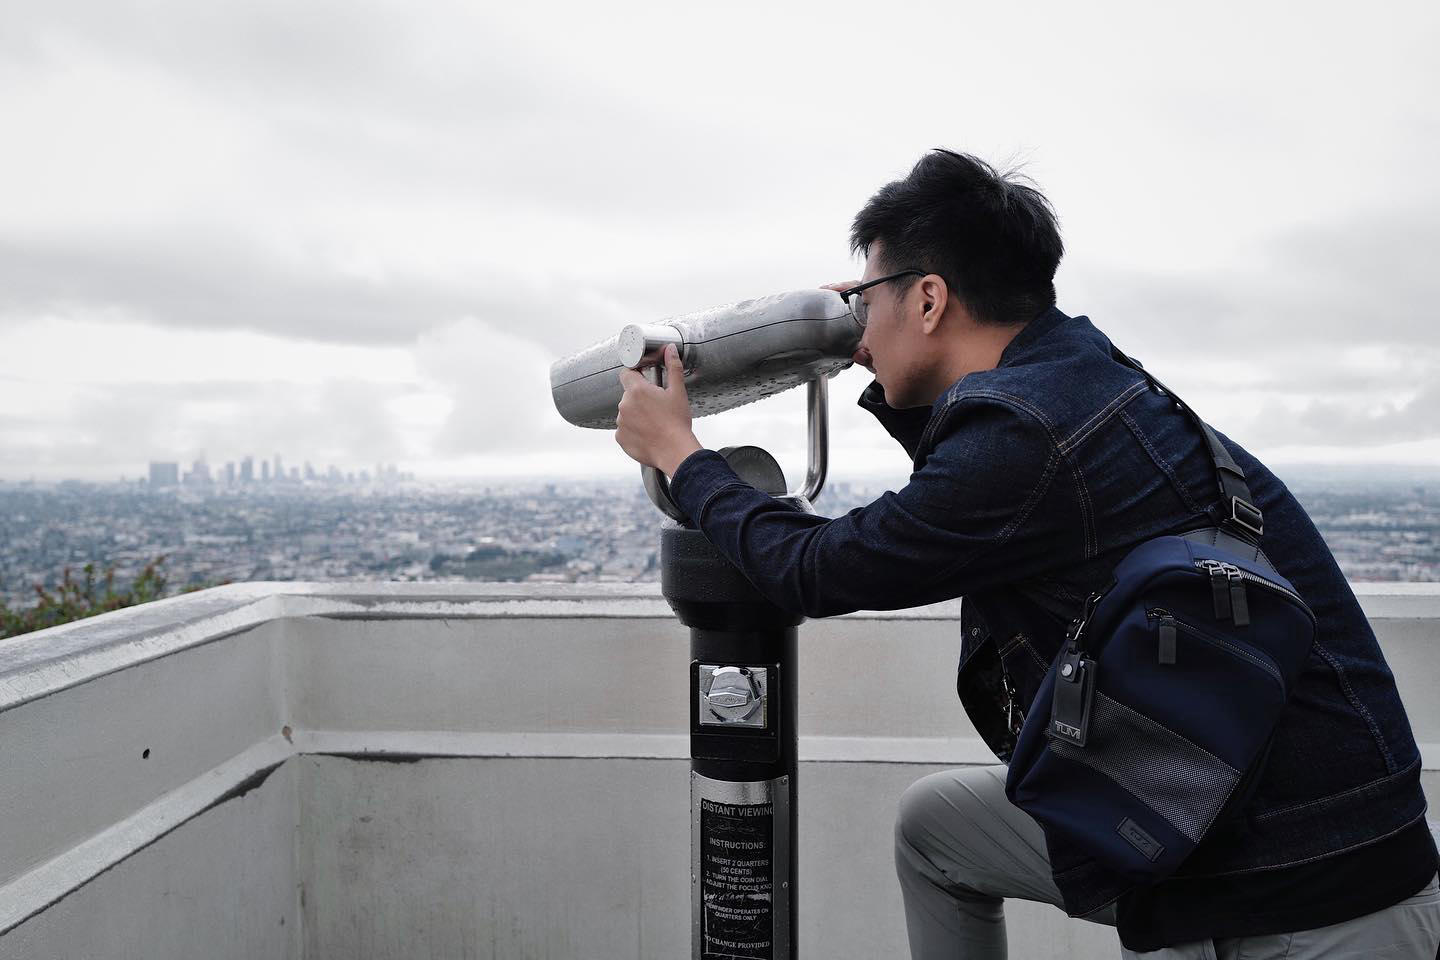 Vincent Cuk - Observing the city from this point #perfectingthejourney #tumihk #tumitravel #tumitrav